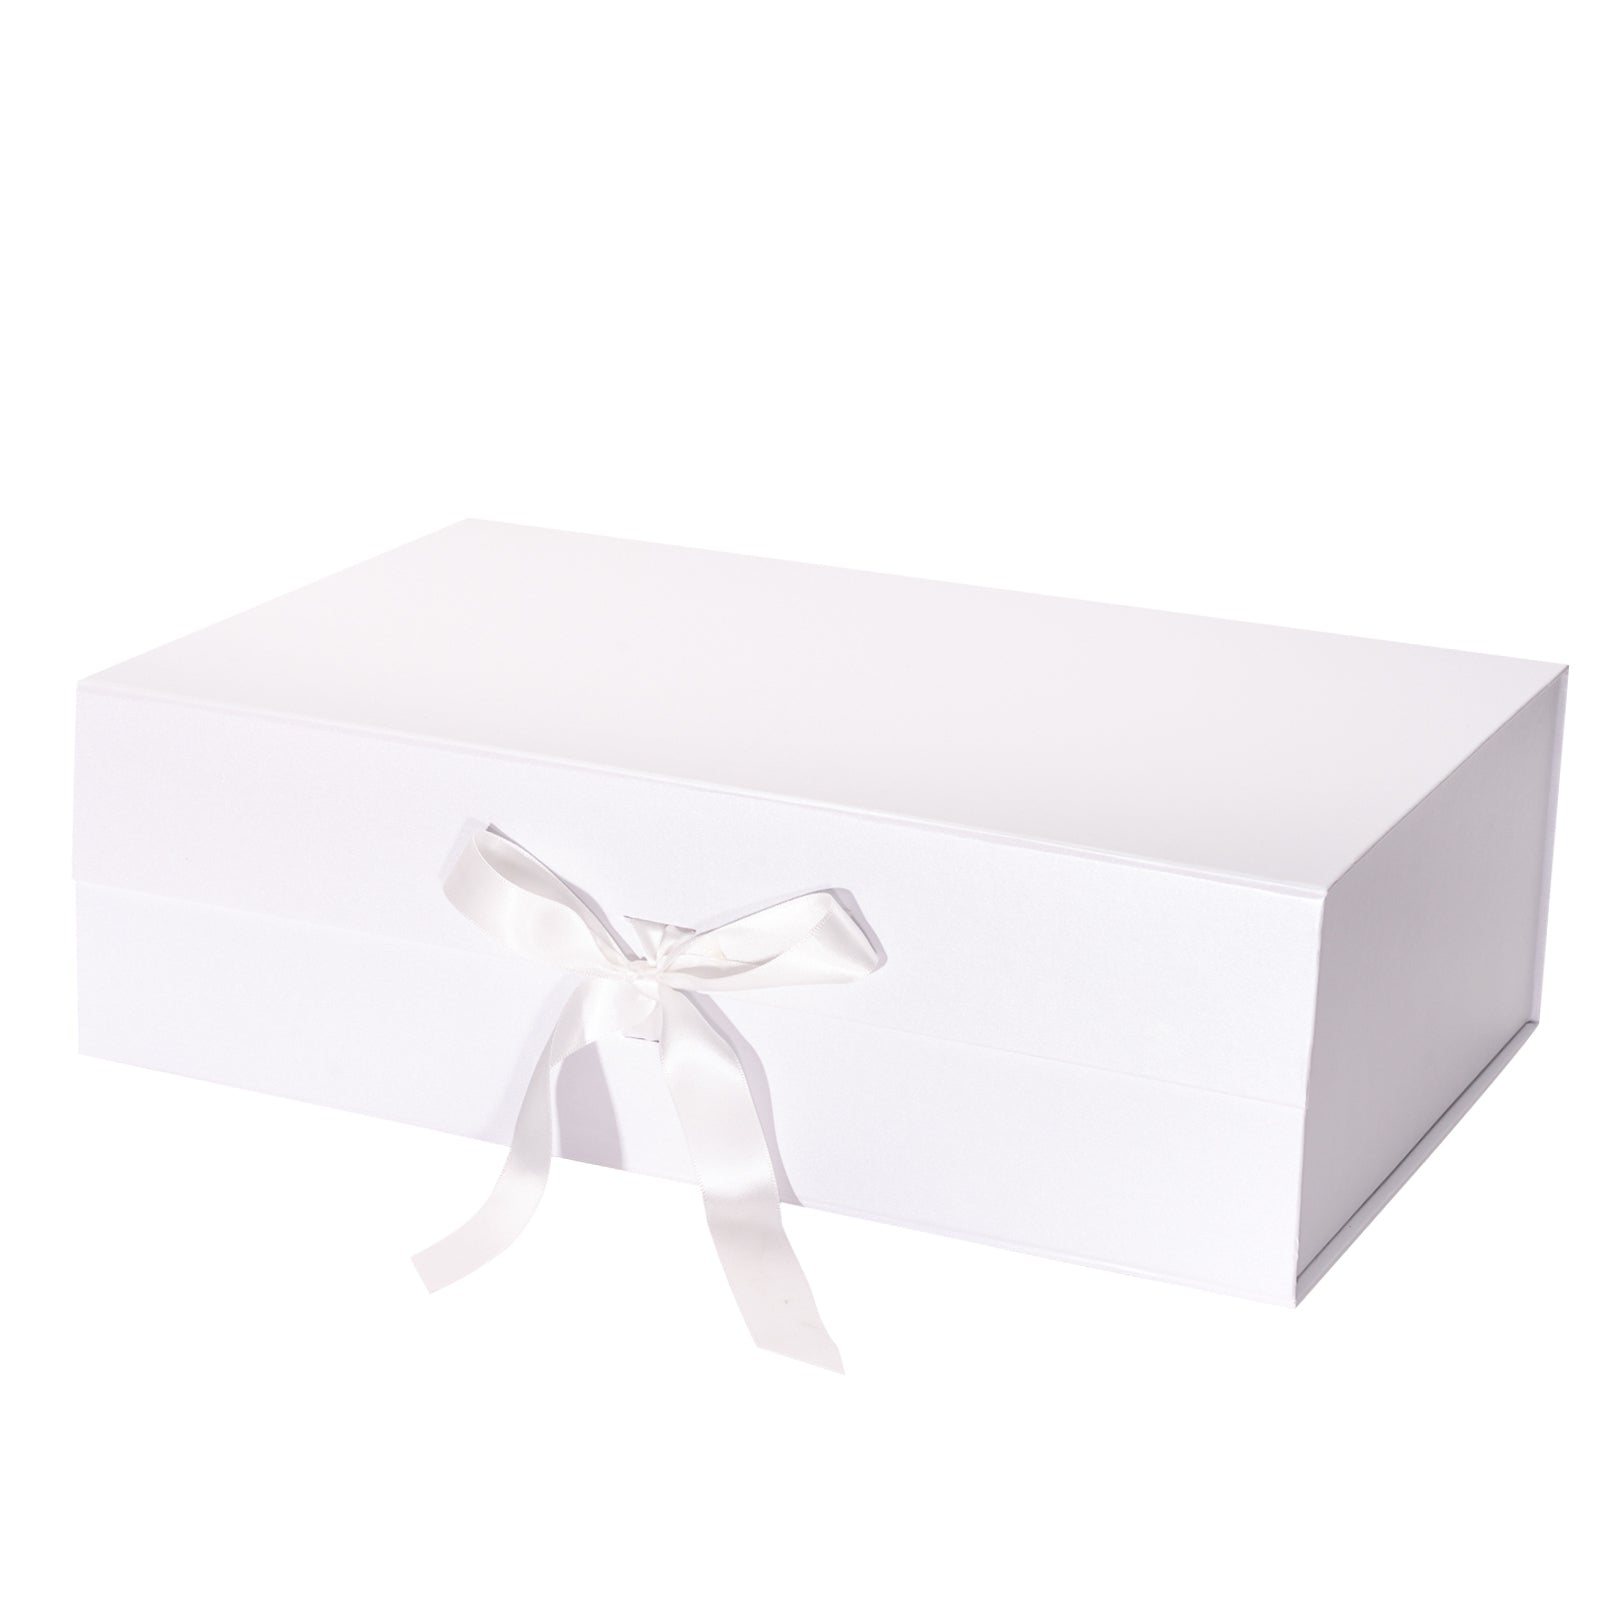 2 Pack 14X9x4.3 inch Magnetic Closure Box with Satin Ribbons